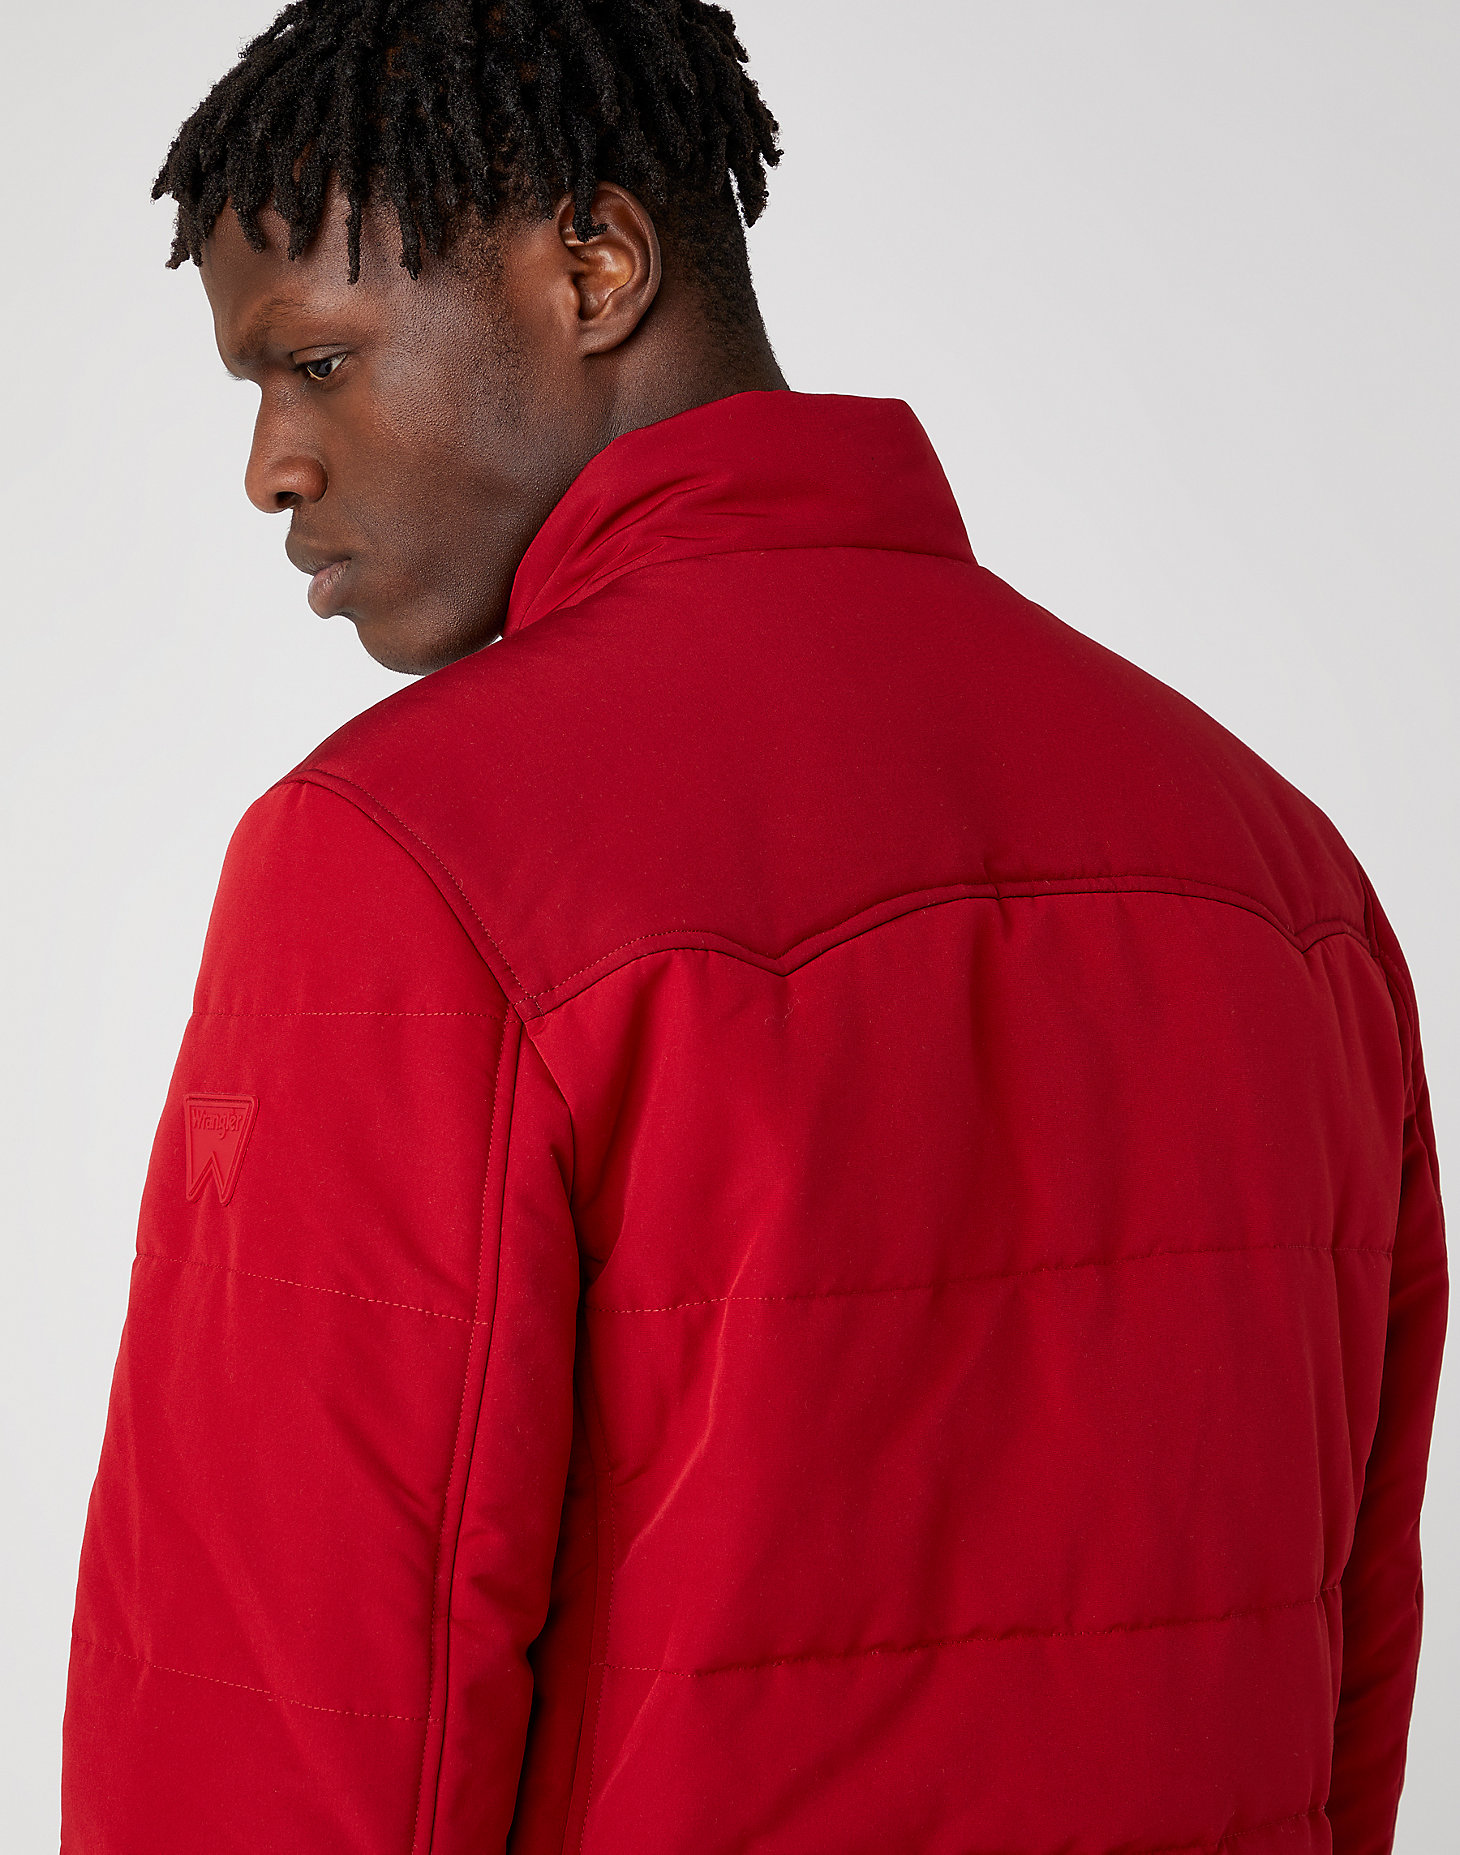 Transitional Puffer in Rio Red alternative view 6